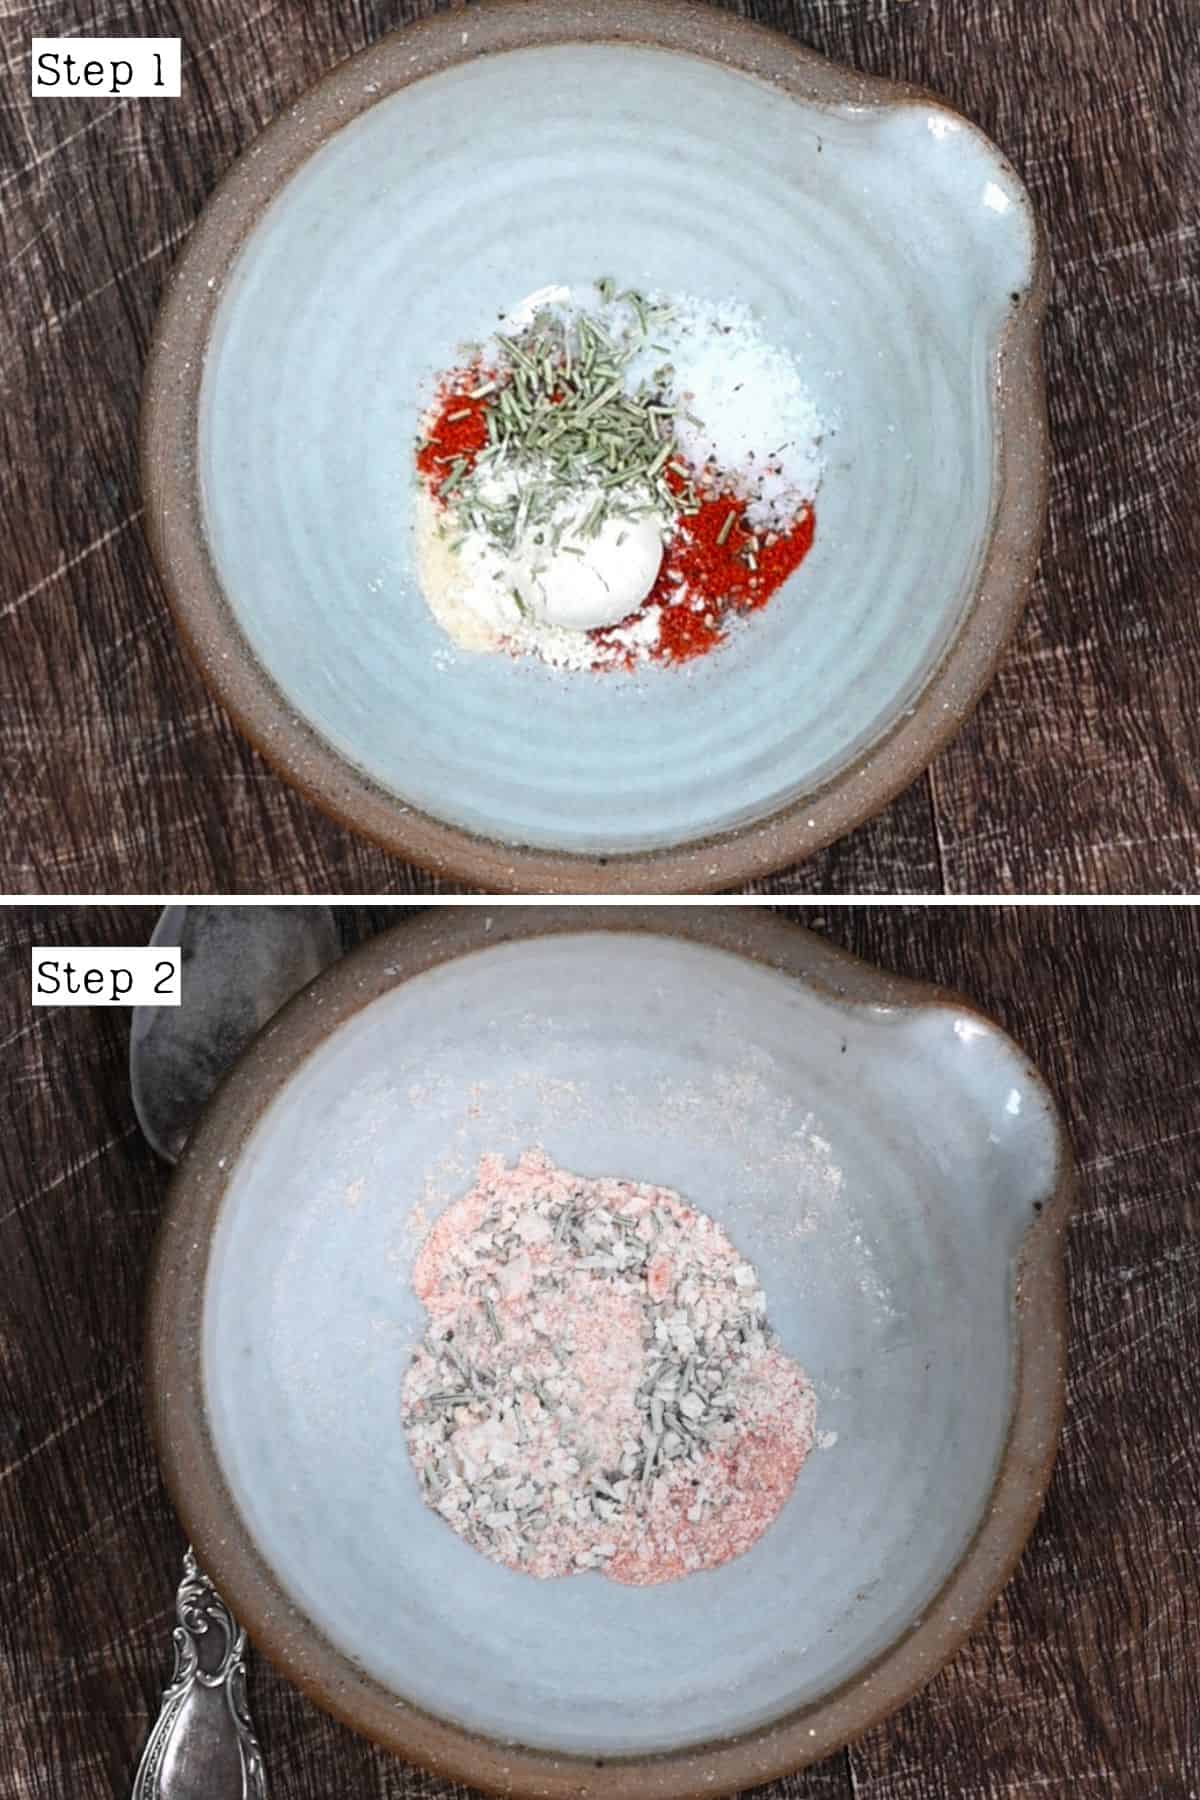 Mixing spices in a bowl